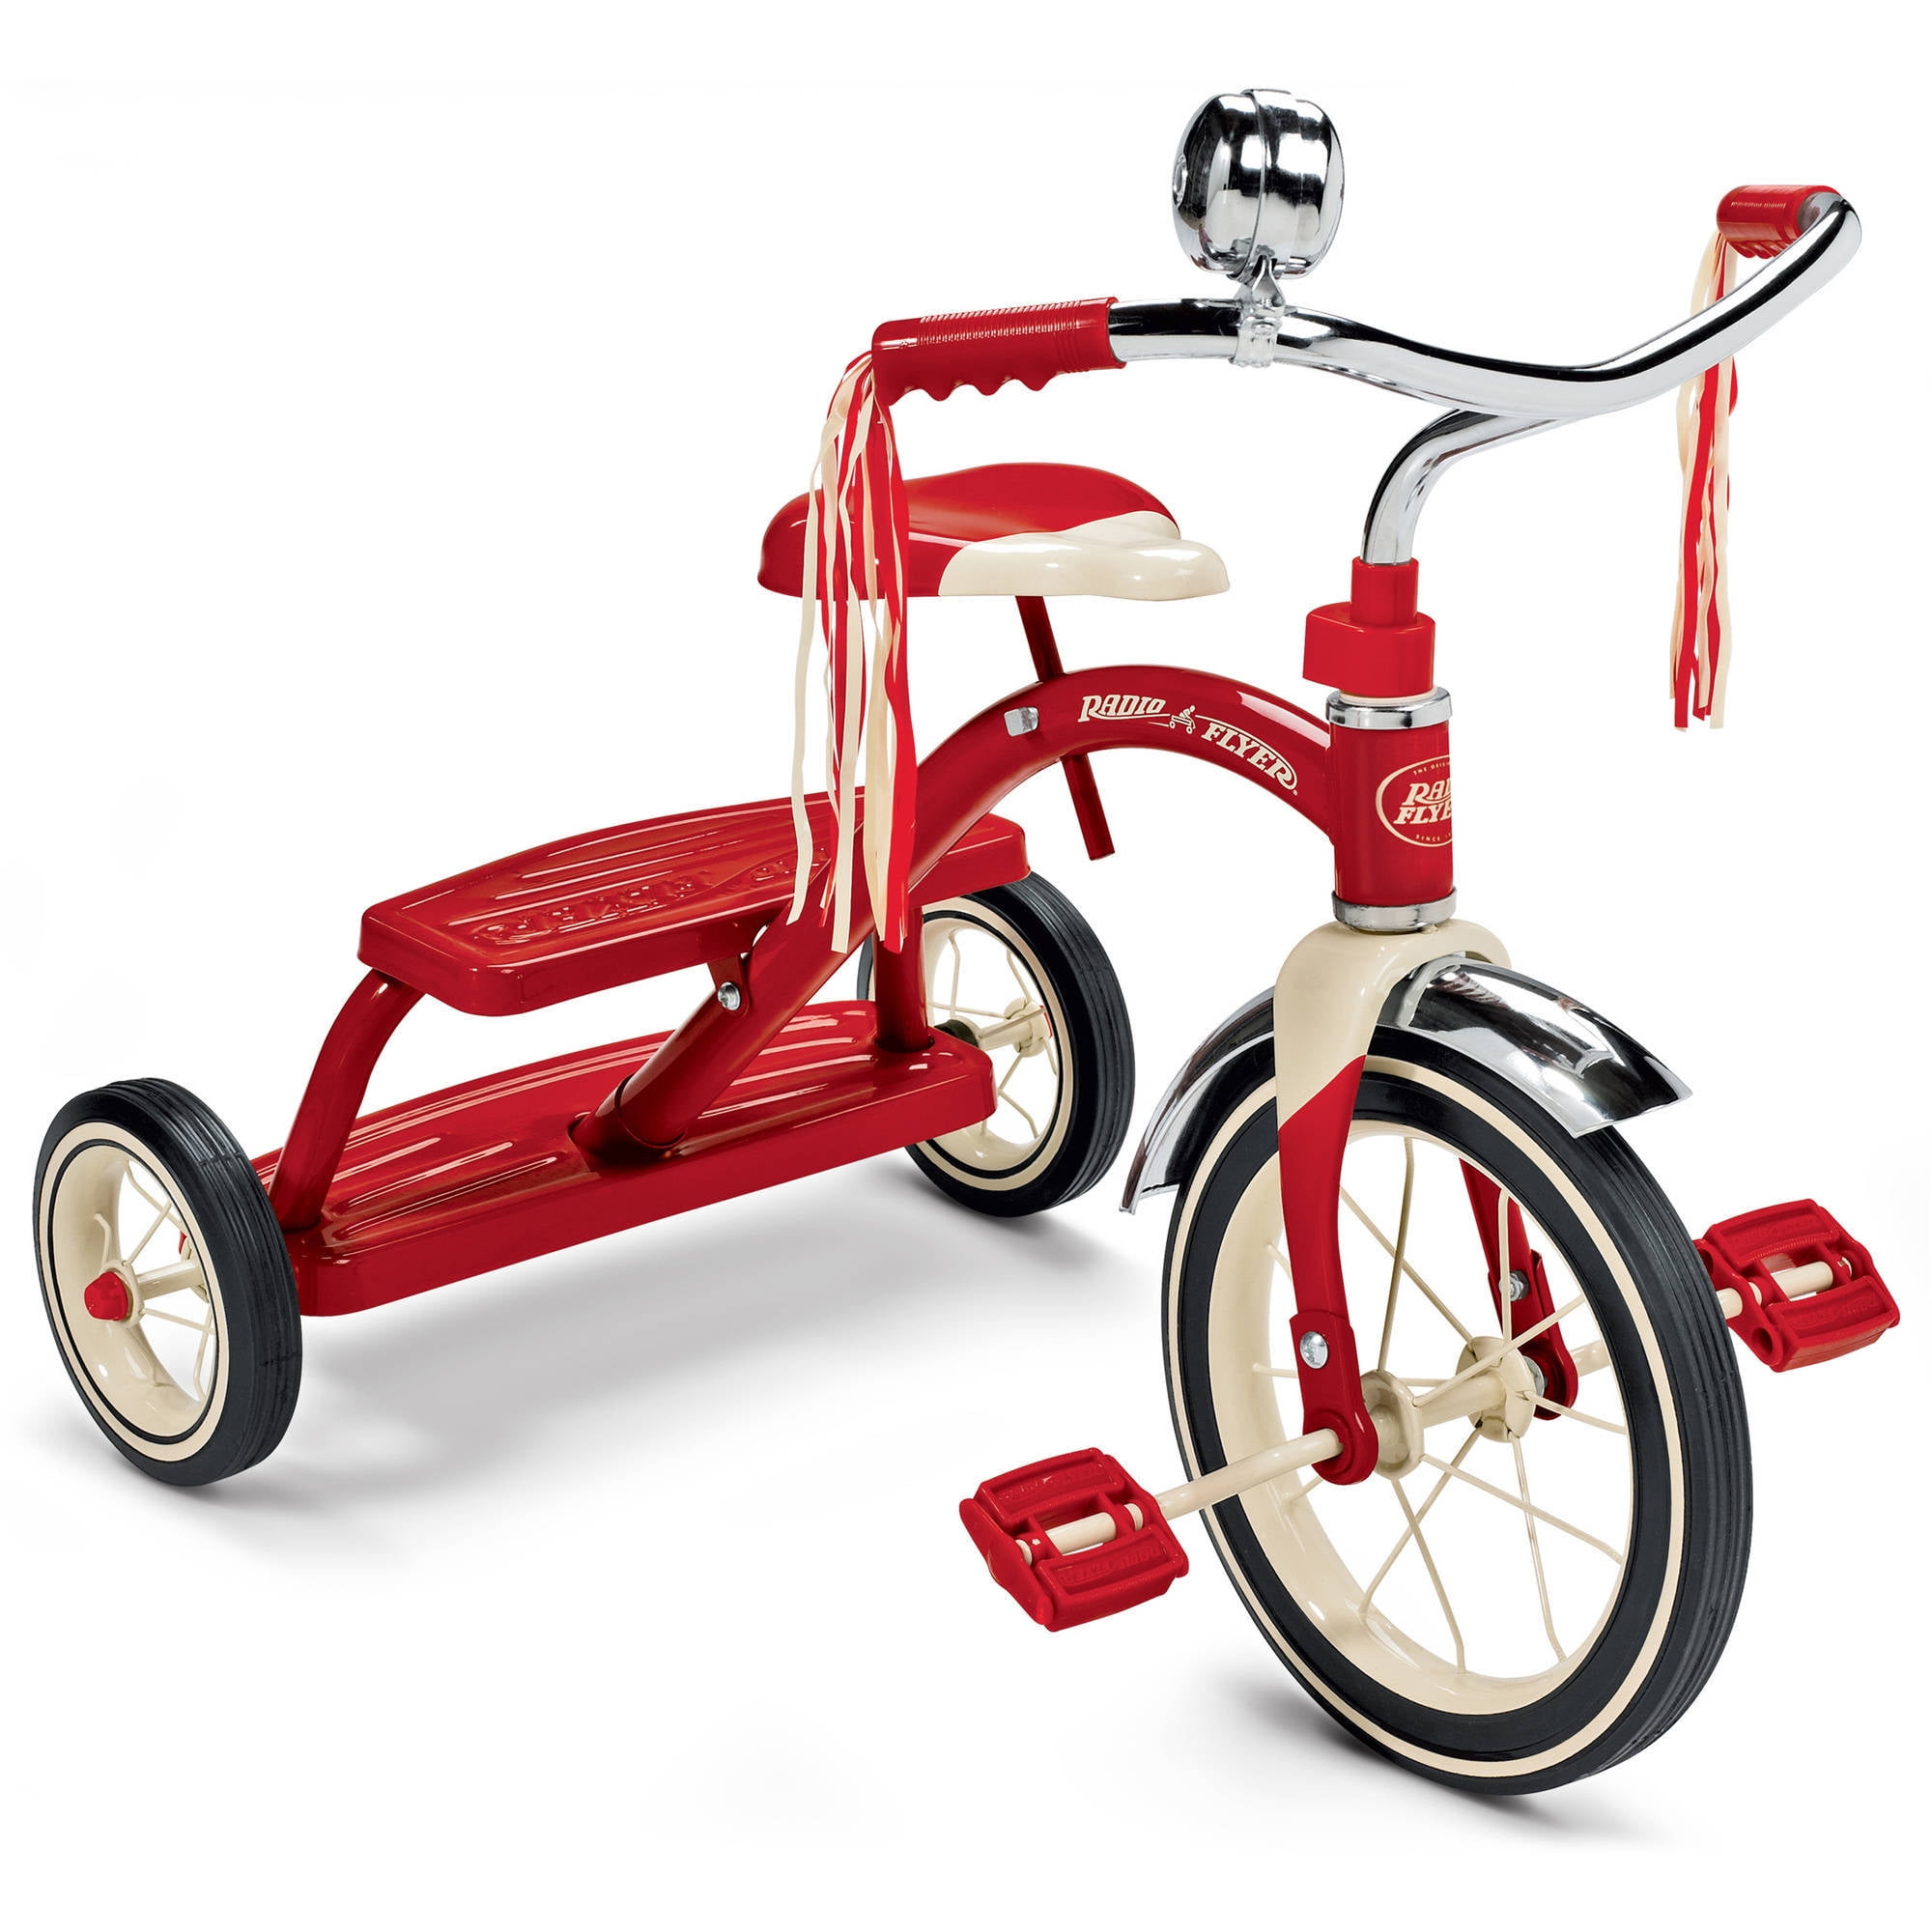 Radio Flyer 33PZ Deck Tricycle Pink for sale online 